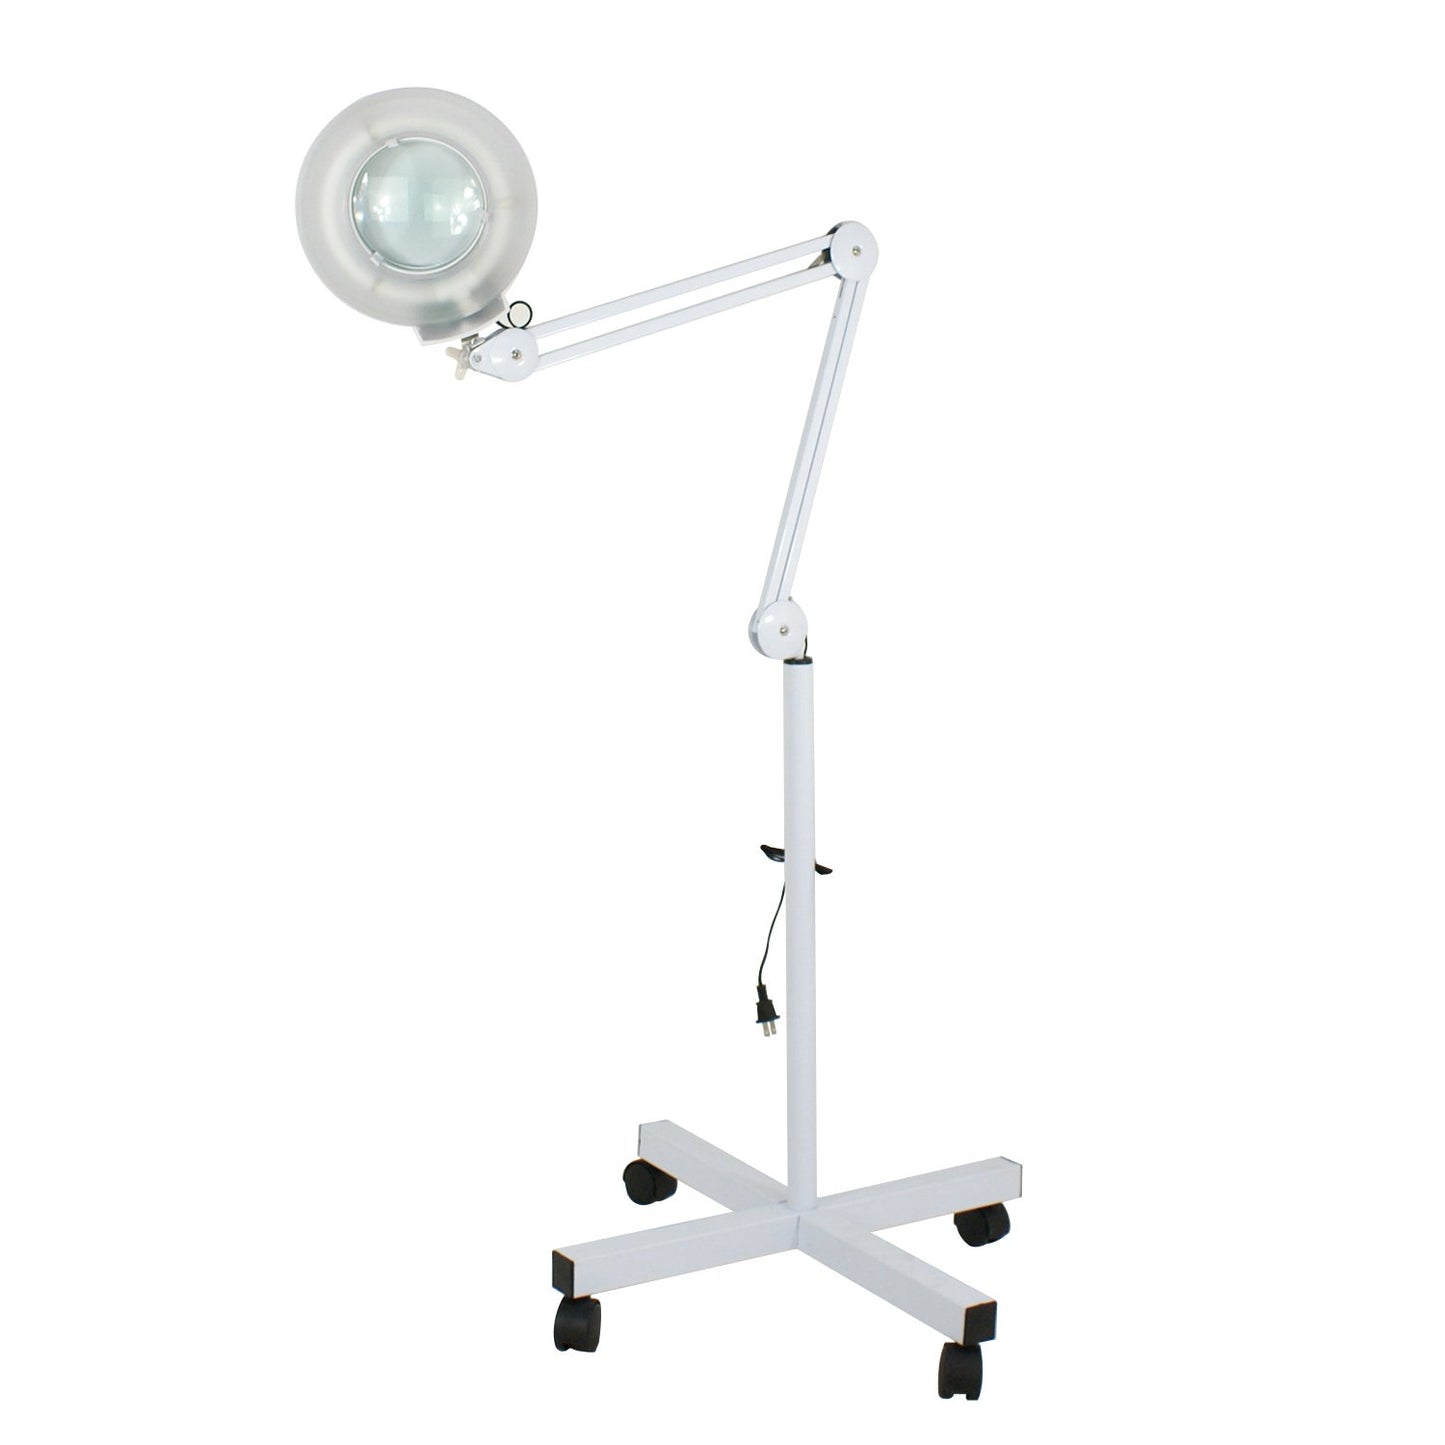 LED Floor Lamp with Magnifying Glass and Light Magnifier Light with Stand Adjustable Swivel Arm for Facial Care, Reading Crafting Sewing Esthetician Light